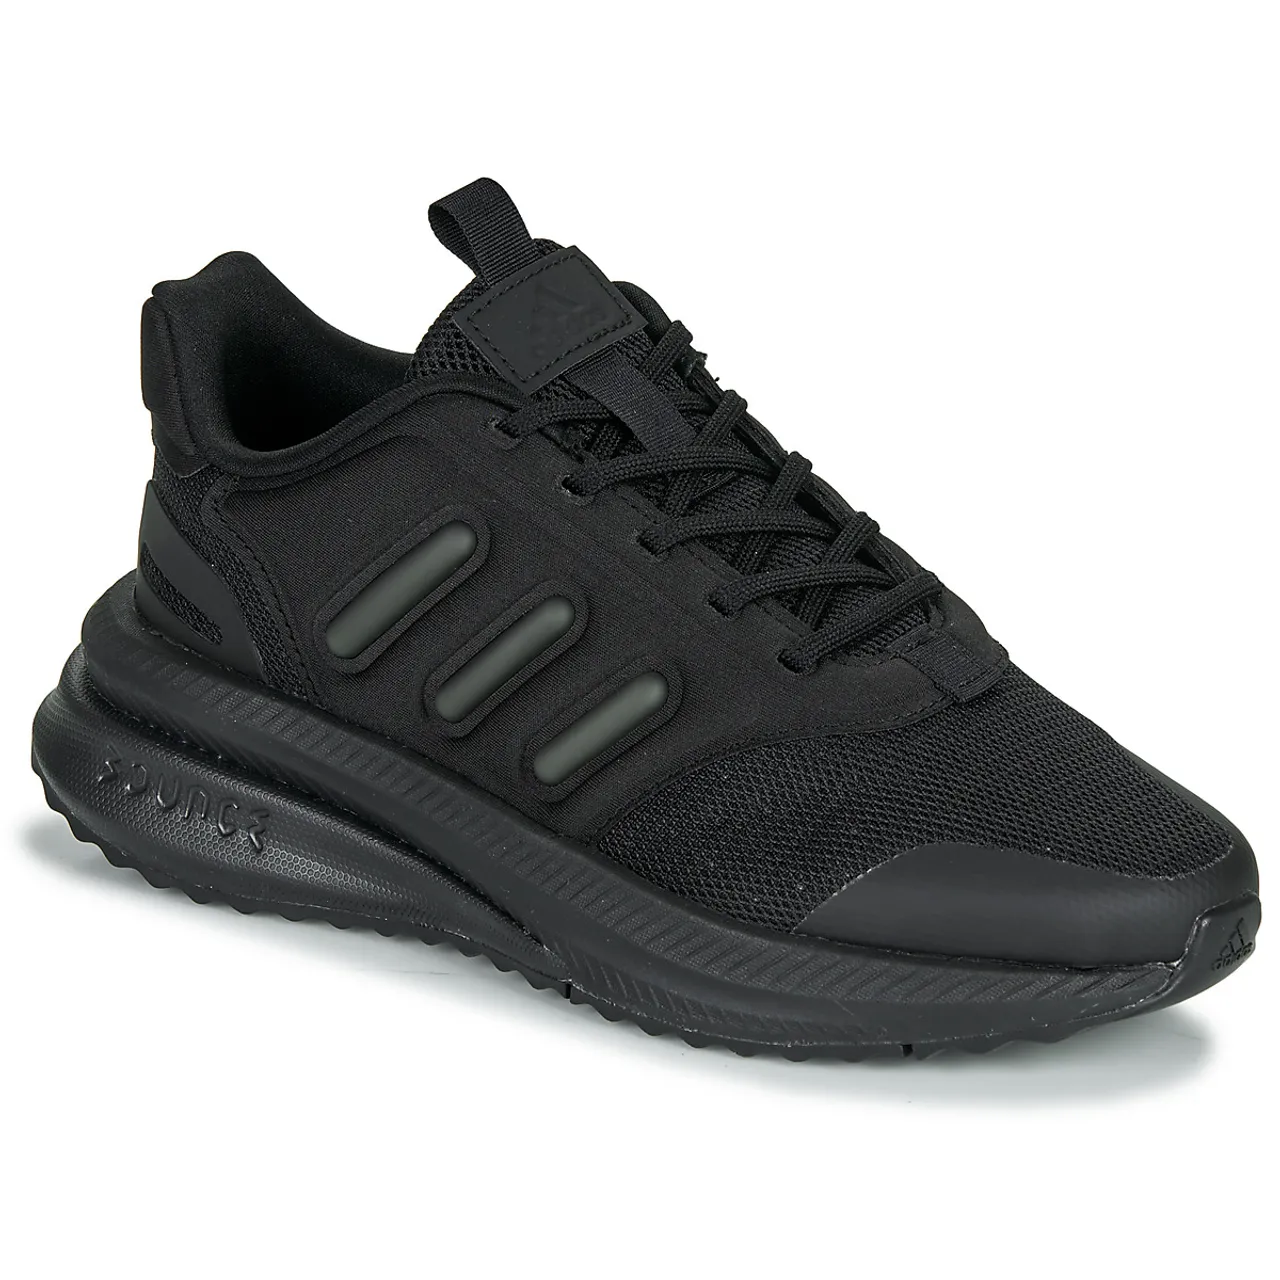 adidas  X_PLRPHASE J  boys's Children's Shoes (Trainers) in Black